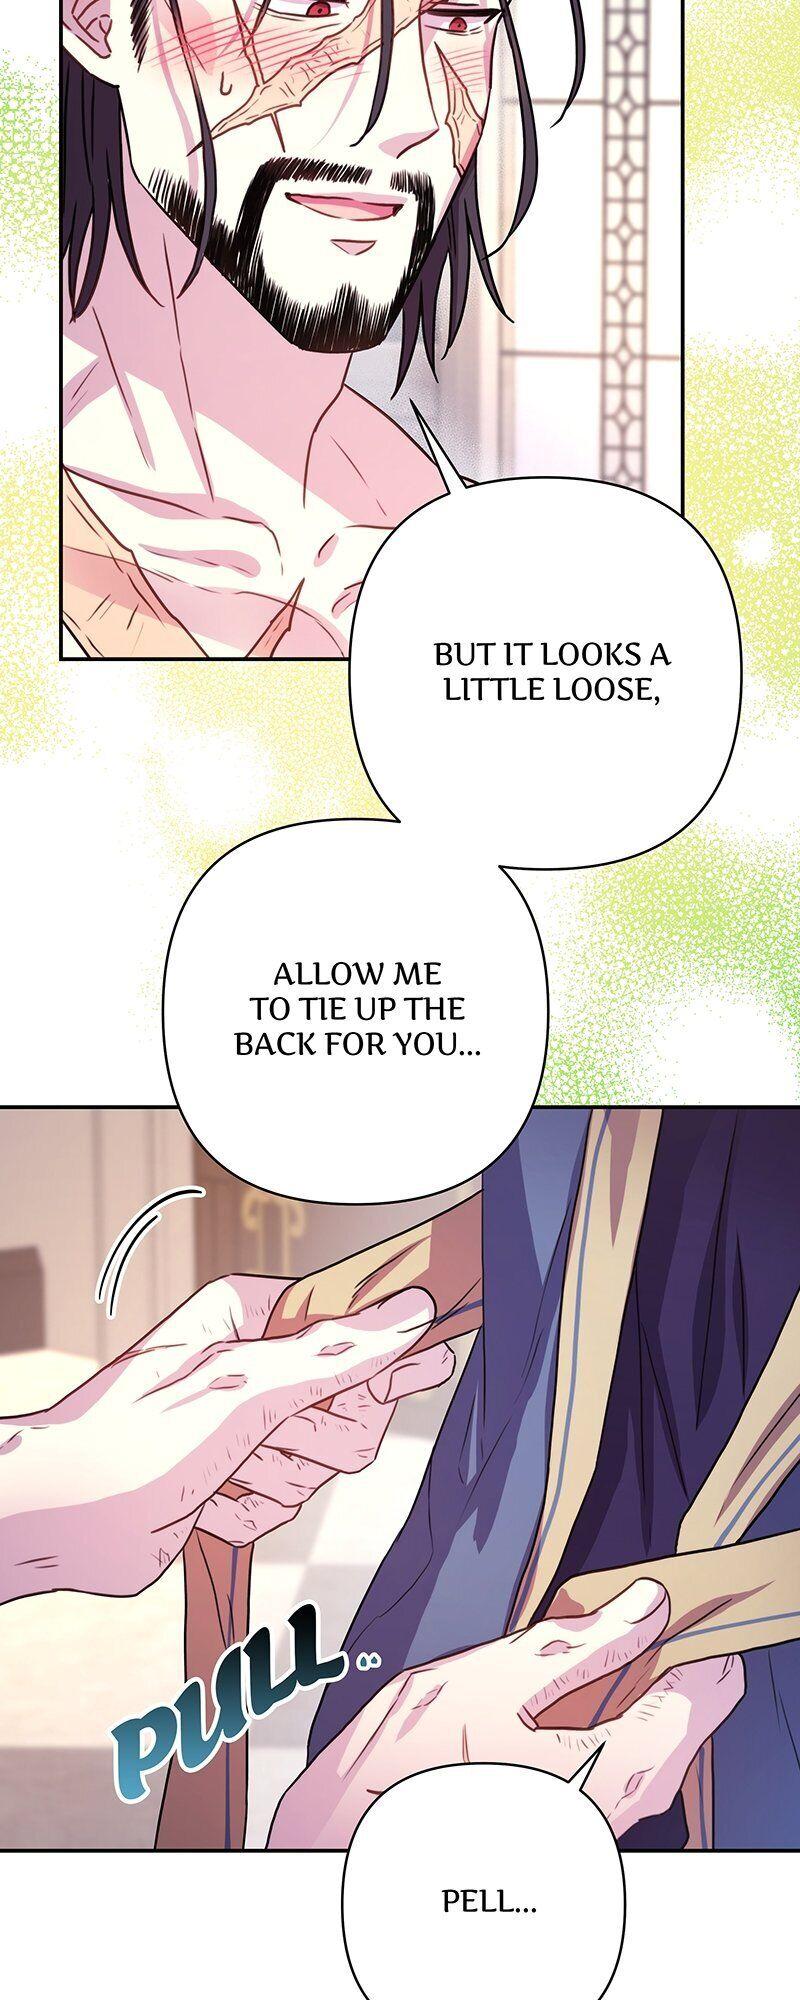 Another typical fantasy romance manhwa